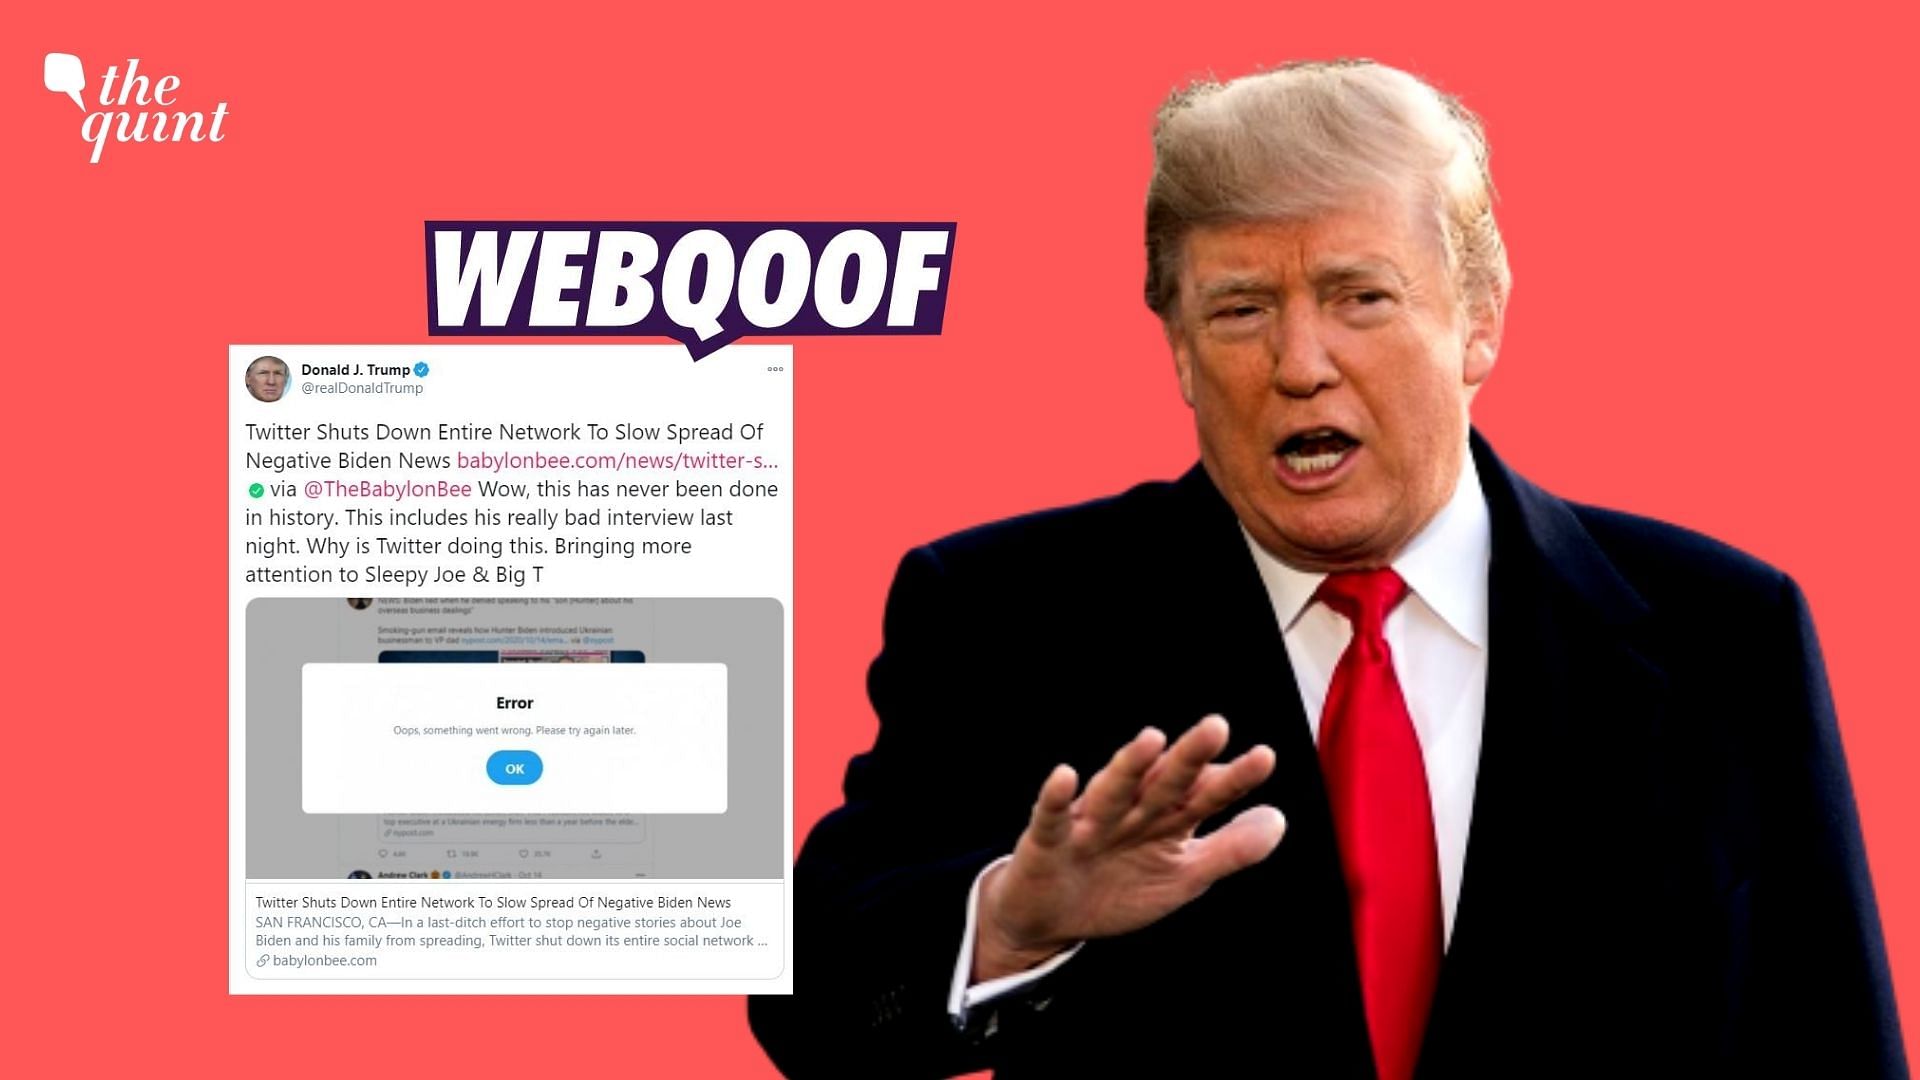 President Trump shared a report by a satire website to claim that Twitter shut down an entire network to slow down the spread of negative Joe Biden news.